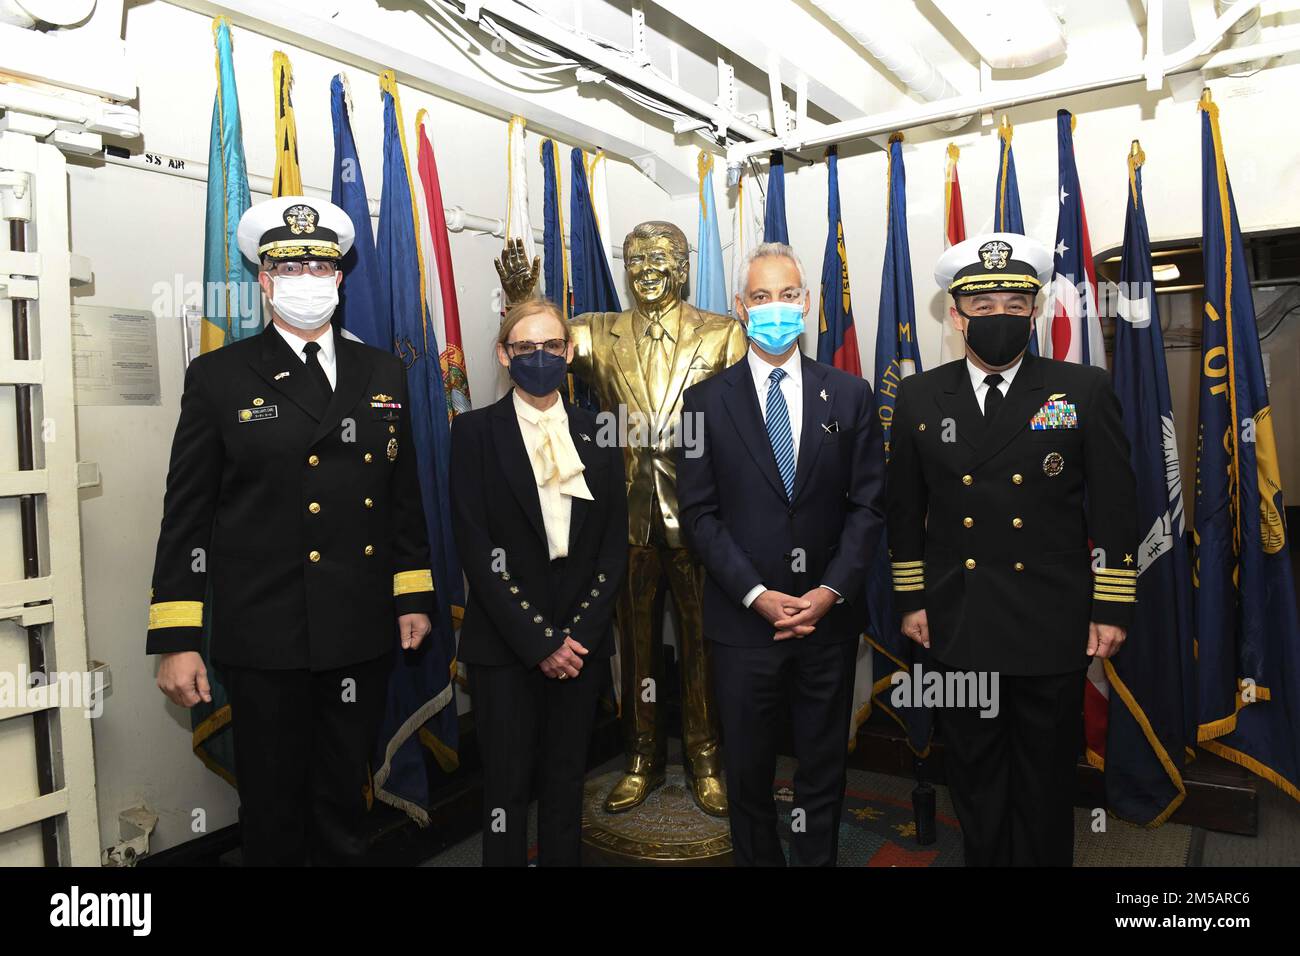 YOKOSUKA - 220217-N-ON904-1419 (Feb. 17, 2022) From left, Rear Adm. Carl Lahti, Commander, Naval Forces Japan, Navy Region, Ms. Amy Rule, U.S. Ambassador to Japan, Rahm Emanuel, and Capt. Fred Goldhammer, USS Ronald Reagan (CVN 76) commanding officer, on the ceremonial quarterdeck of Reagan. Emanuel is visiting Yokosuka to mark the importance of the bilateral partnership between the U.S. and Japan. Stock Photo